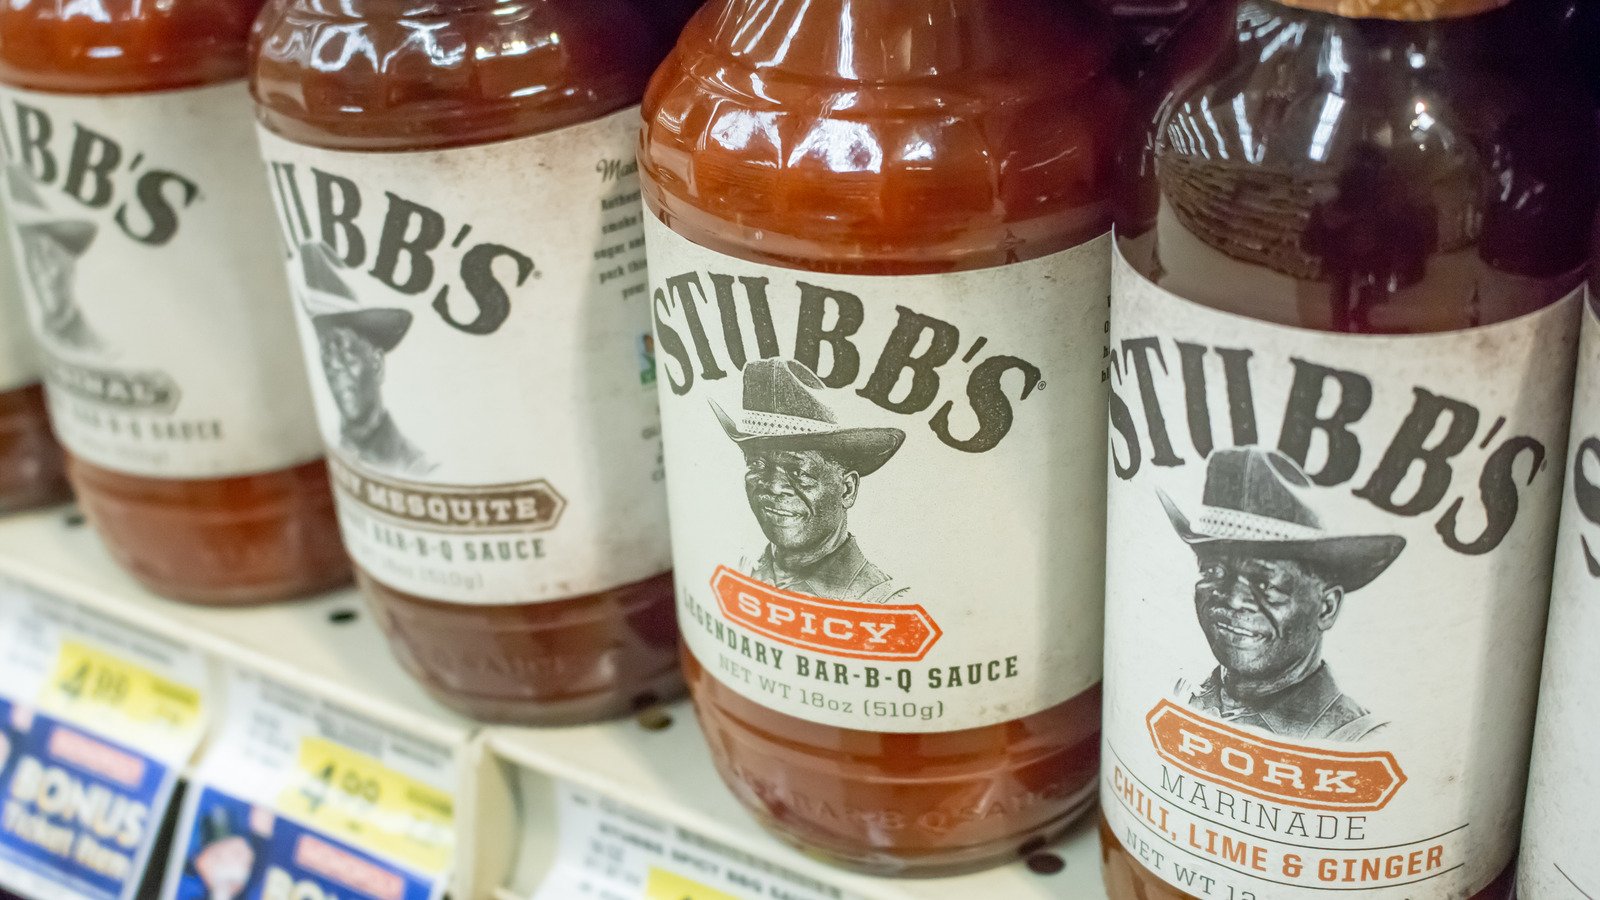 Read This Before Using Any More Stubb's BBQ Sauce